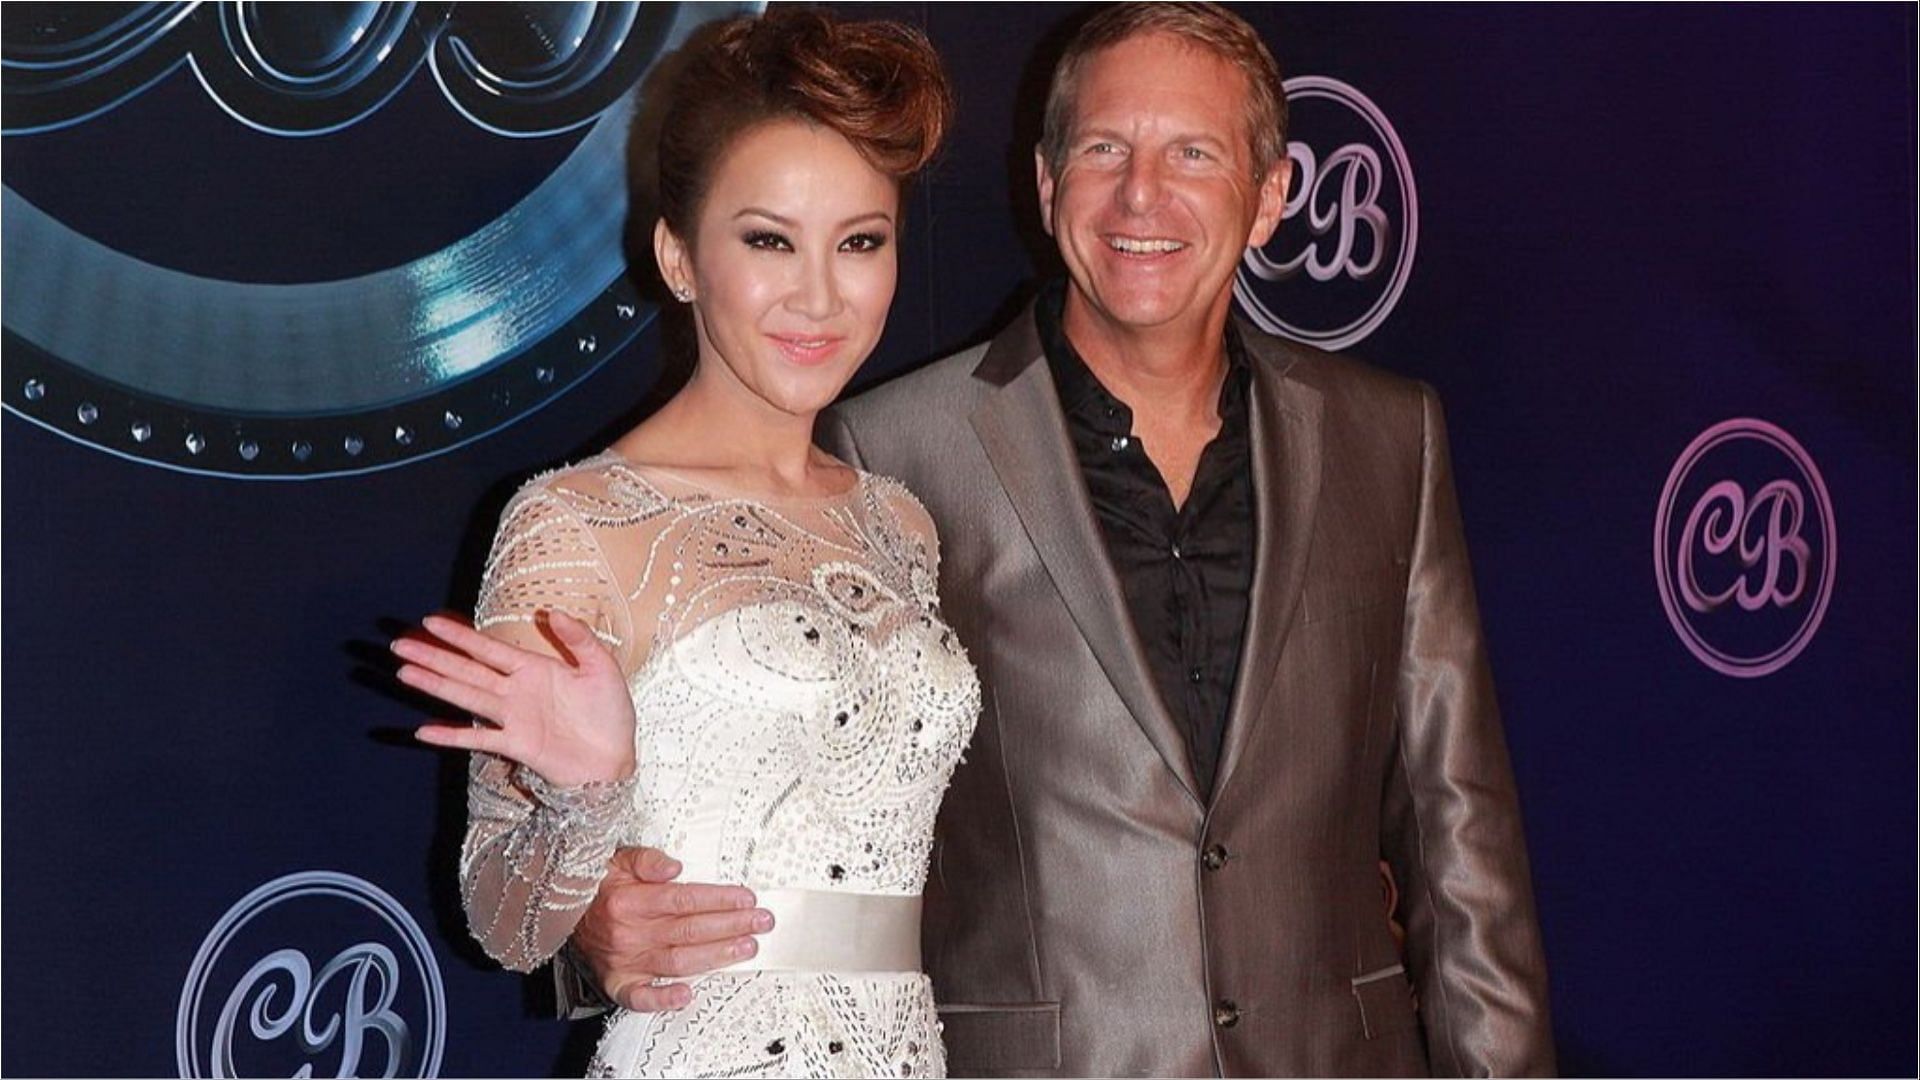 Coco Lee and Bruce Rockowitz exchanged vows in 2011 (Image via Visual China Group/Getty Images)